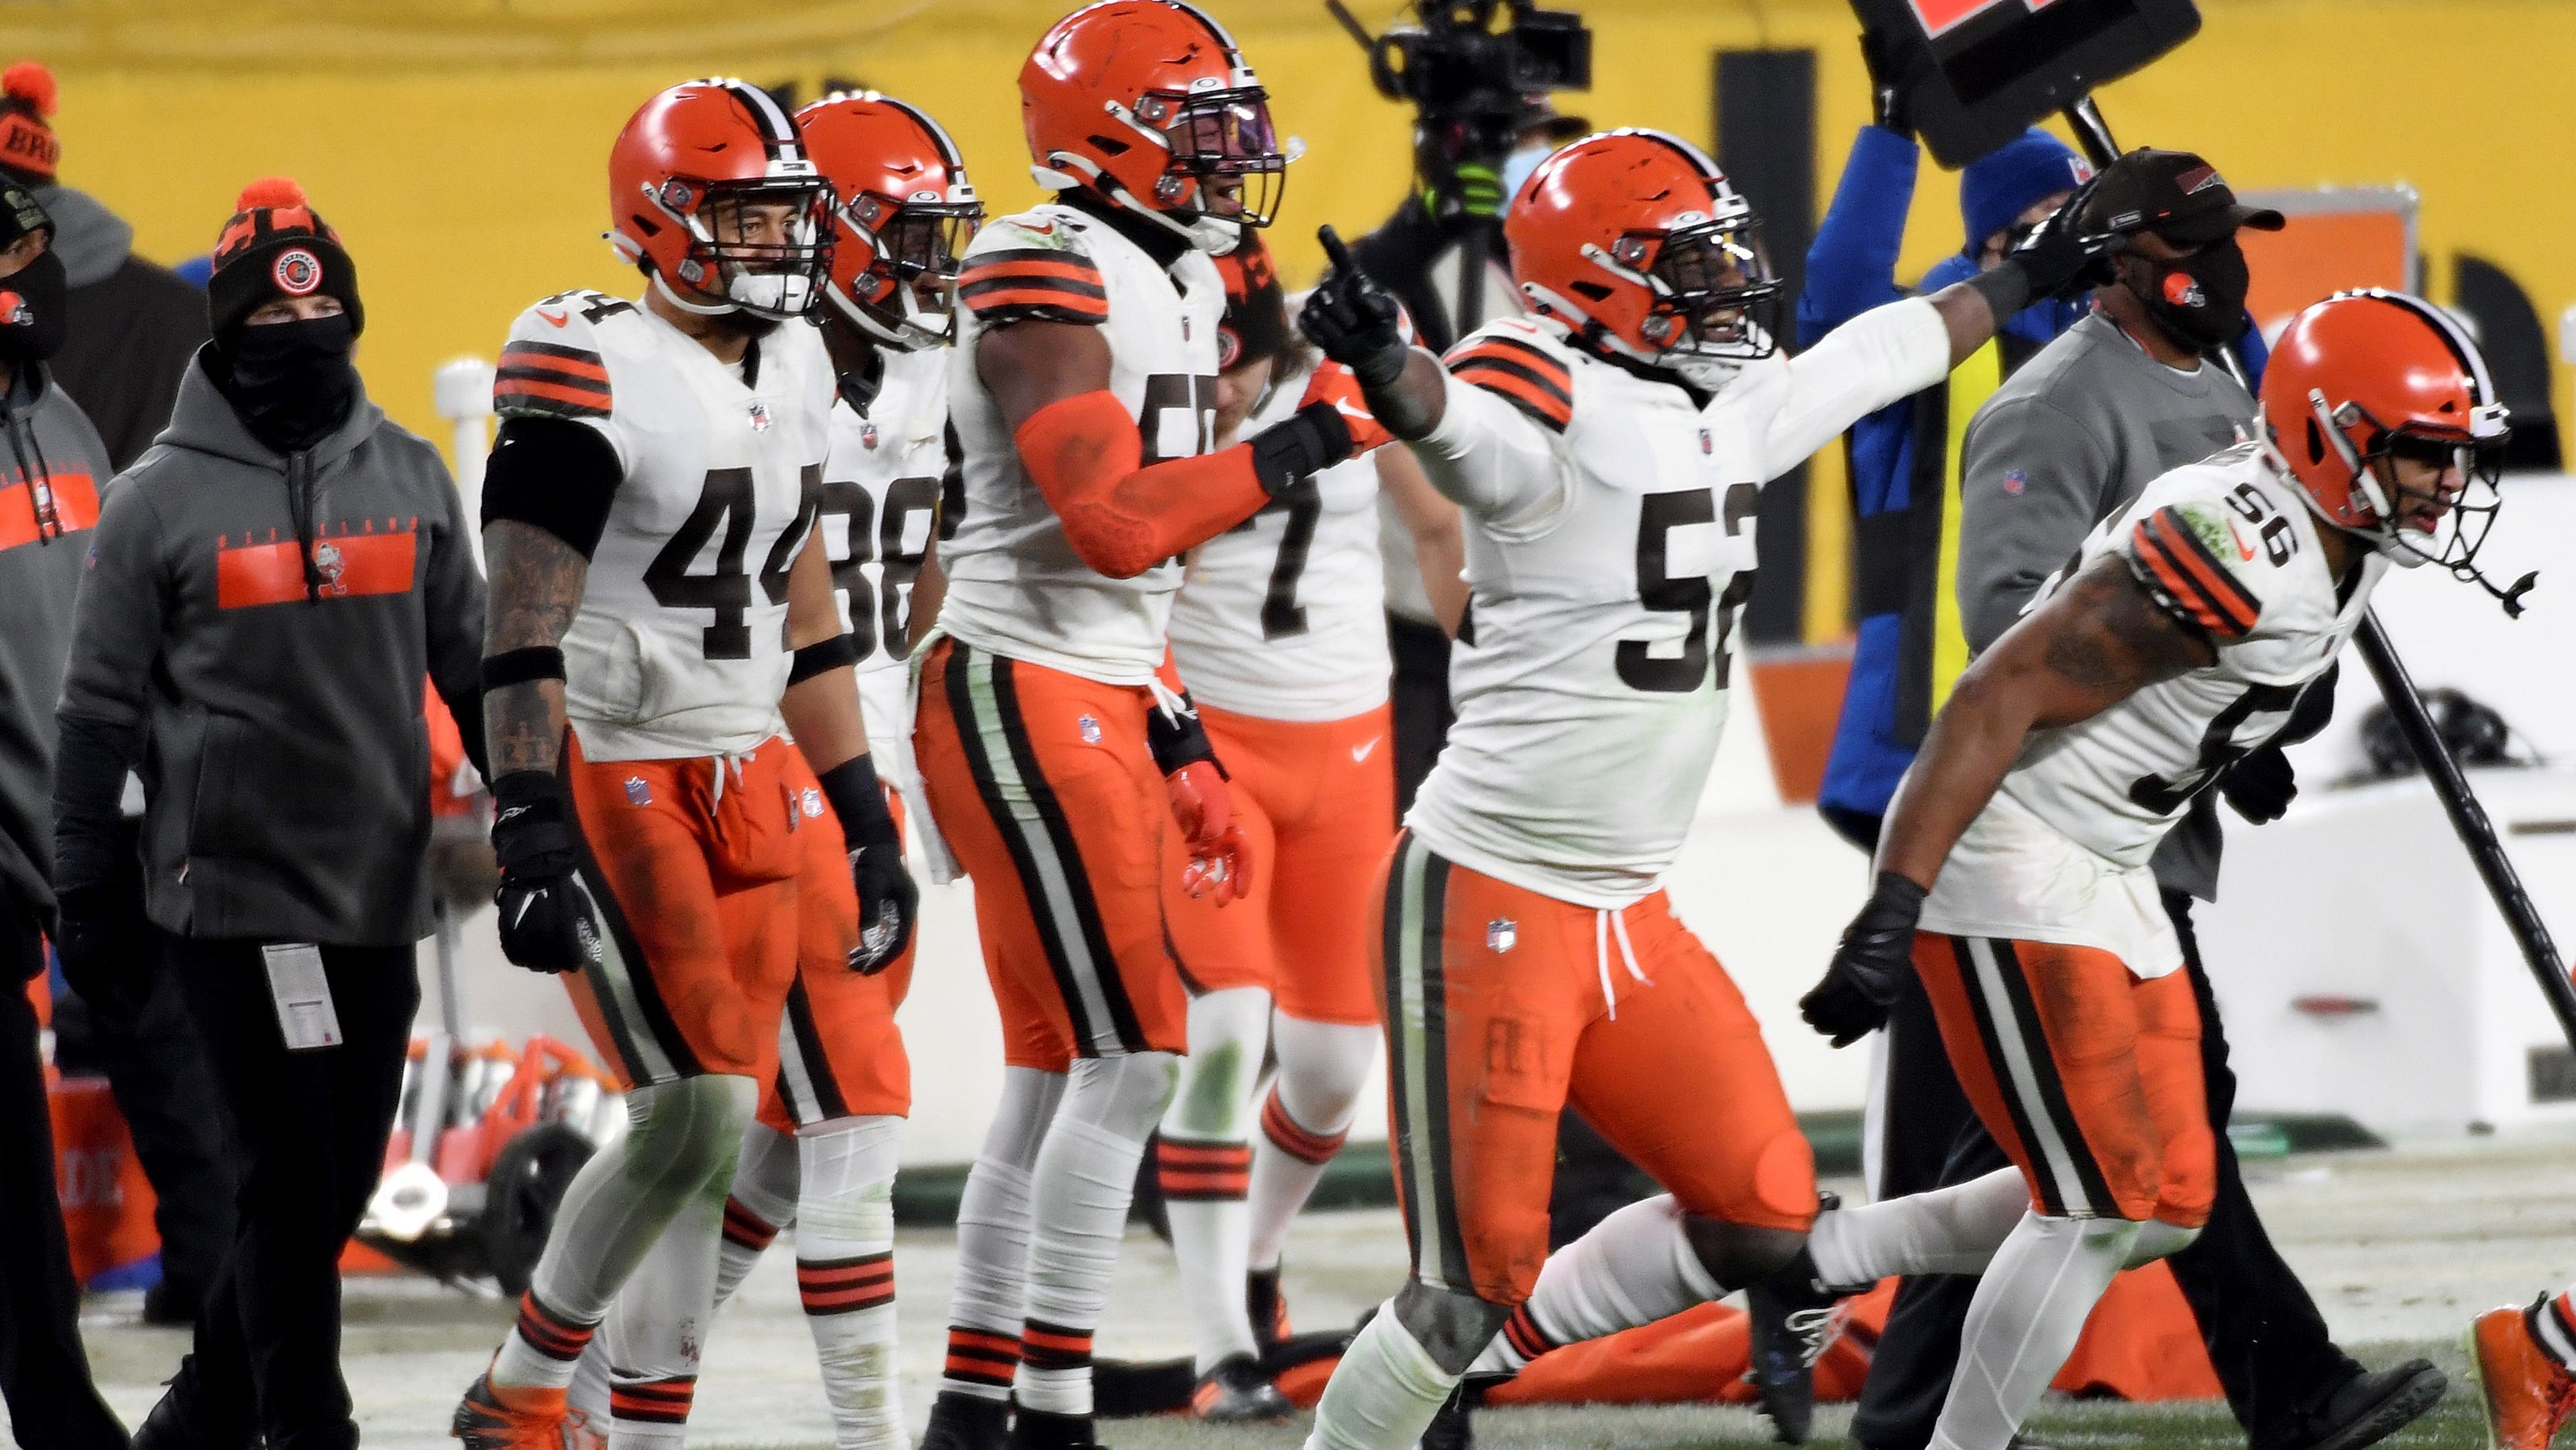 Browns show resiliency in NFL playoff win over Steelers